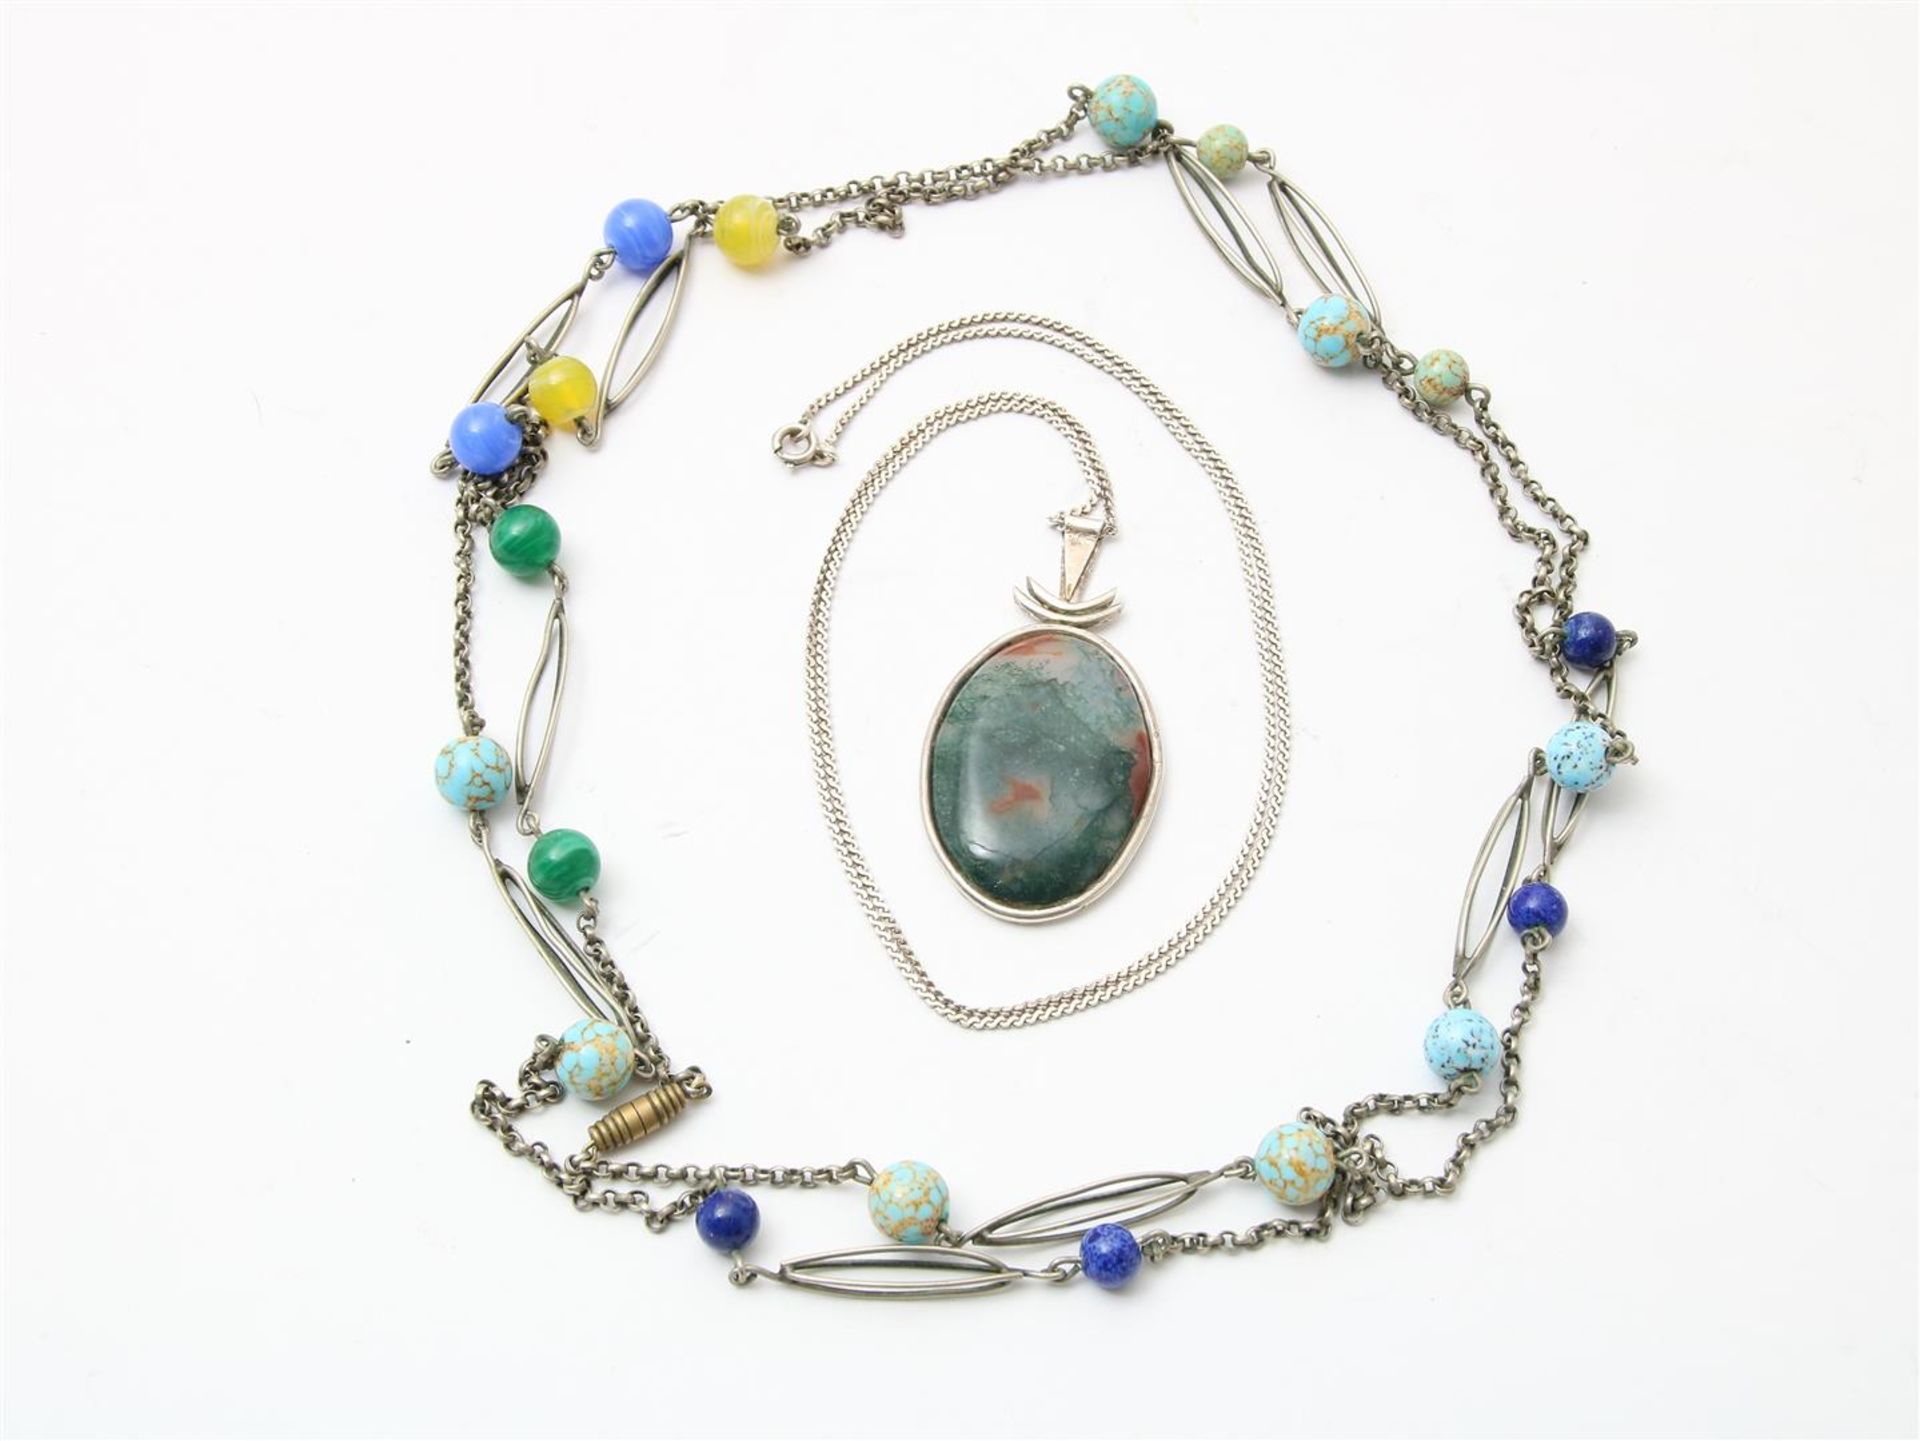 Silver hanger with moss agate and necklace with various semi-precious stones